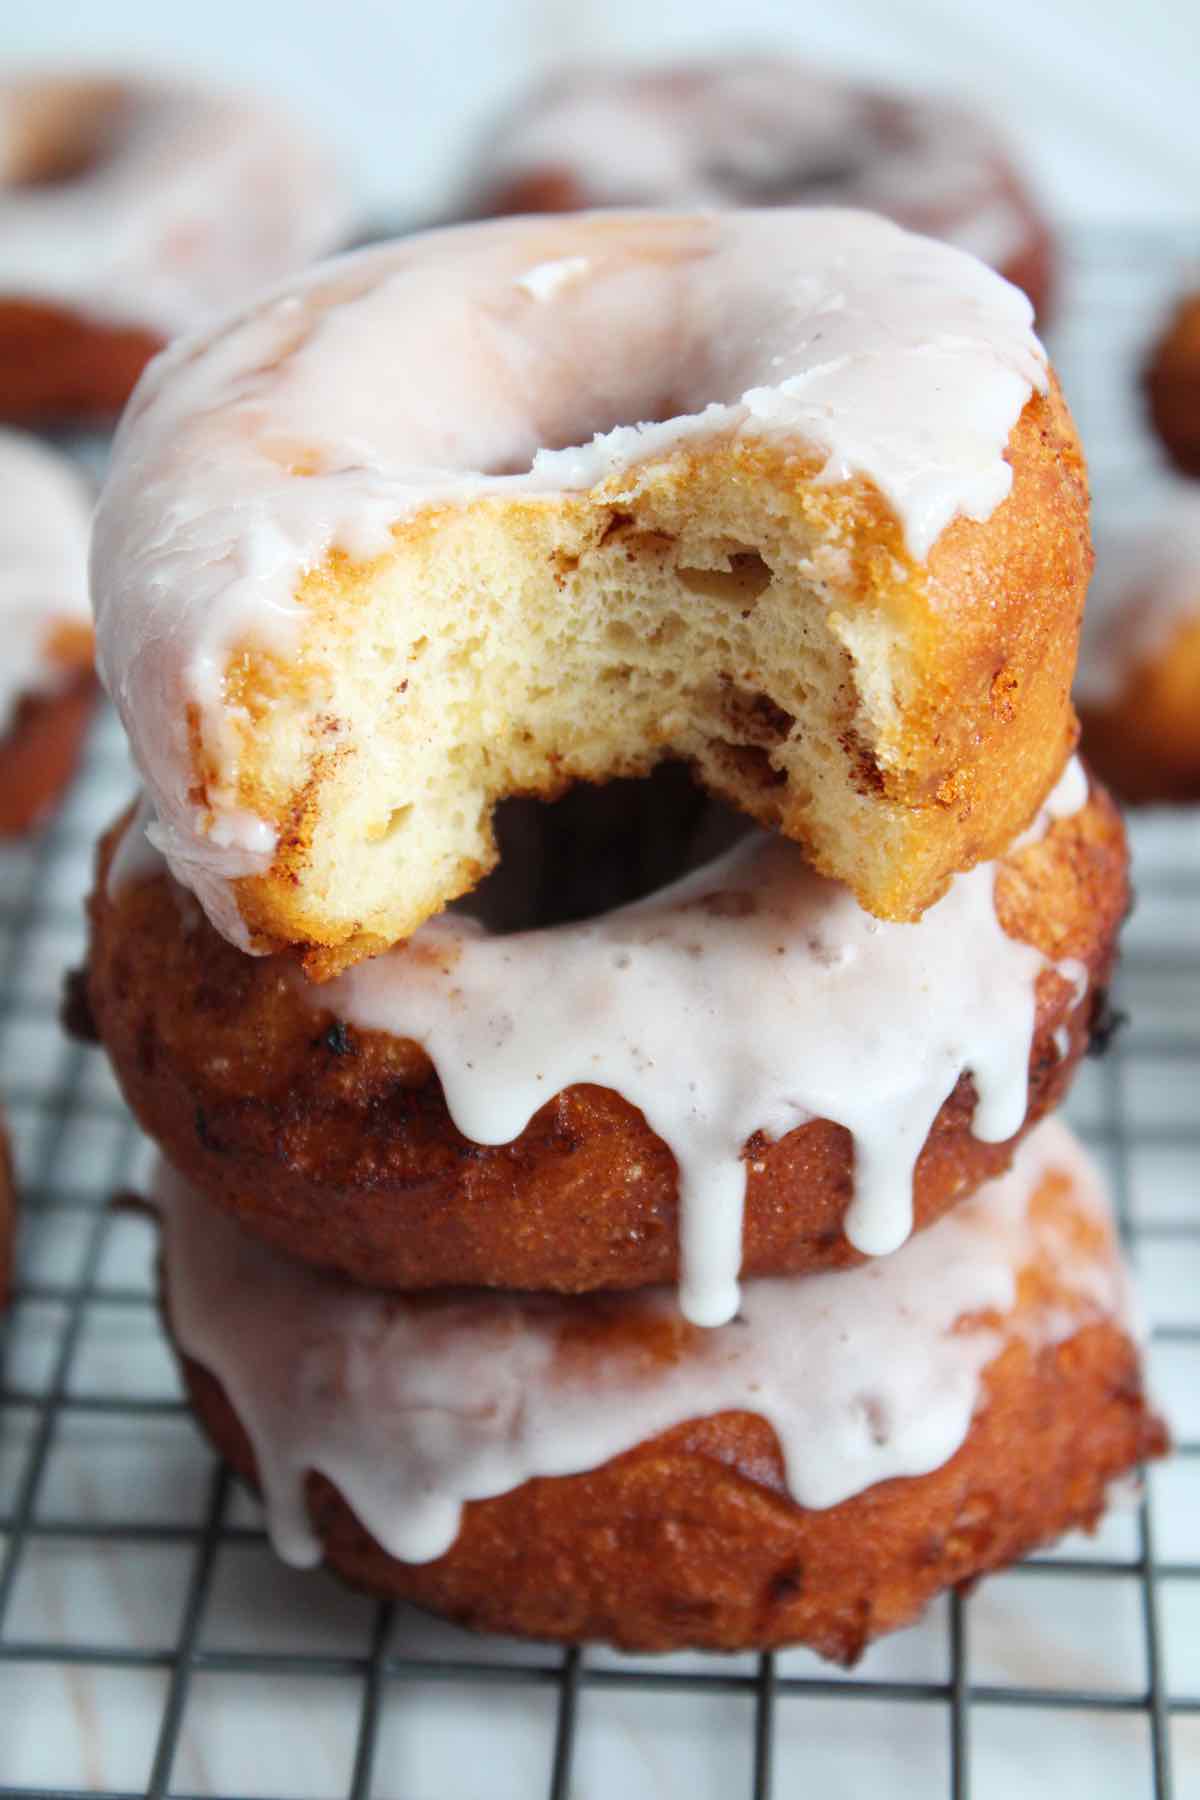 All you need are 2 ingredients to make this easy cinnamon roll donut recipe.